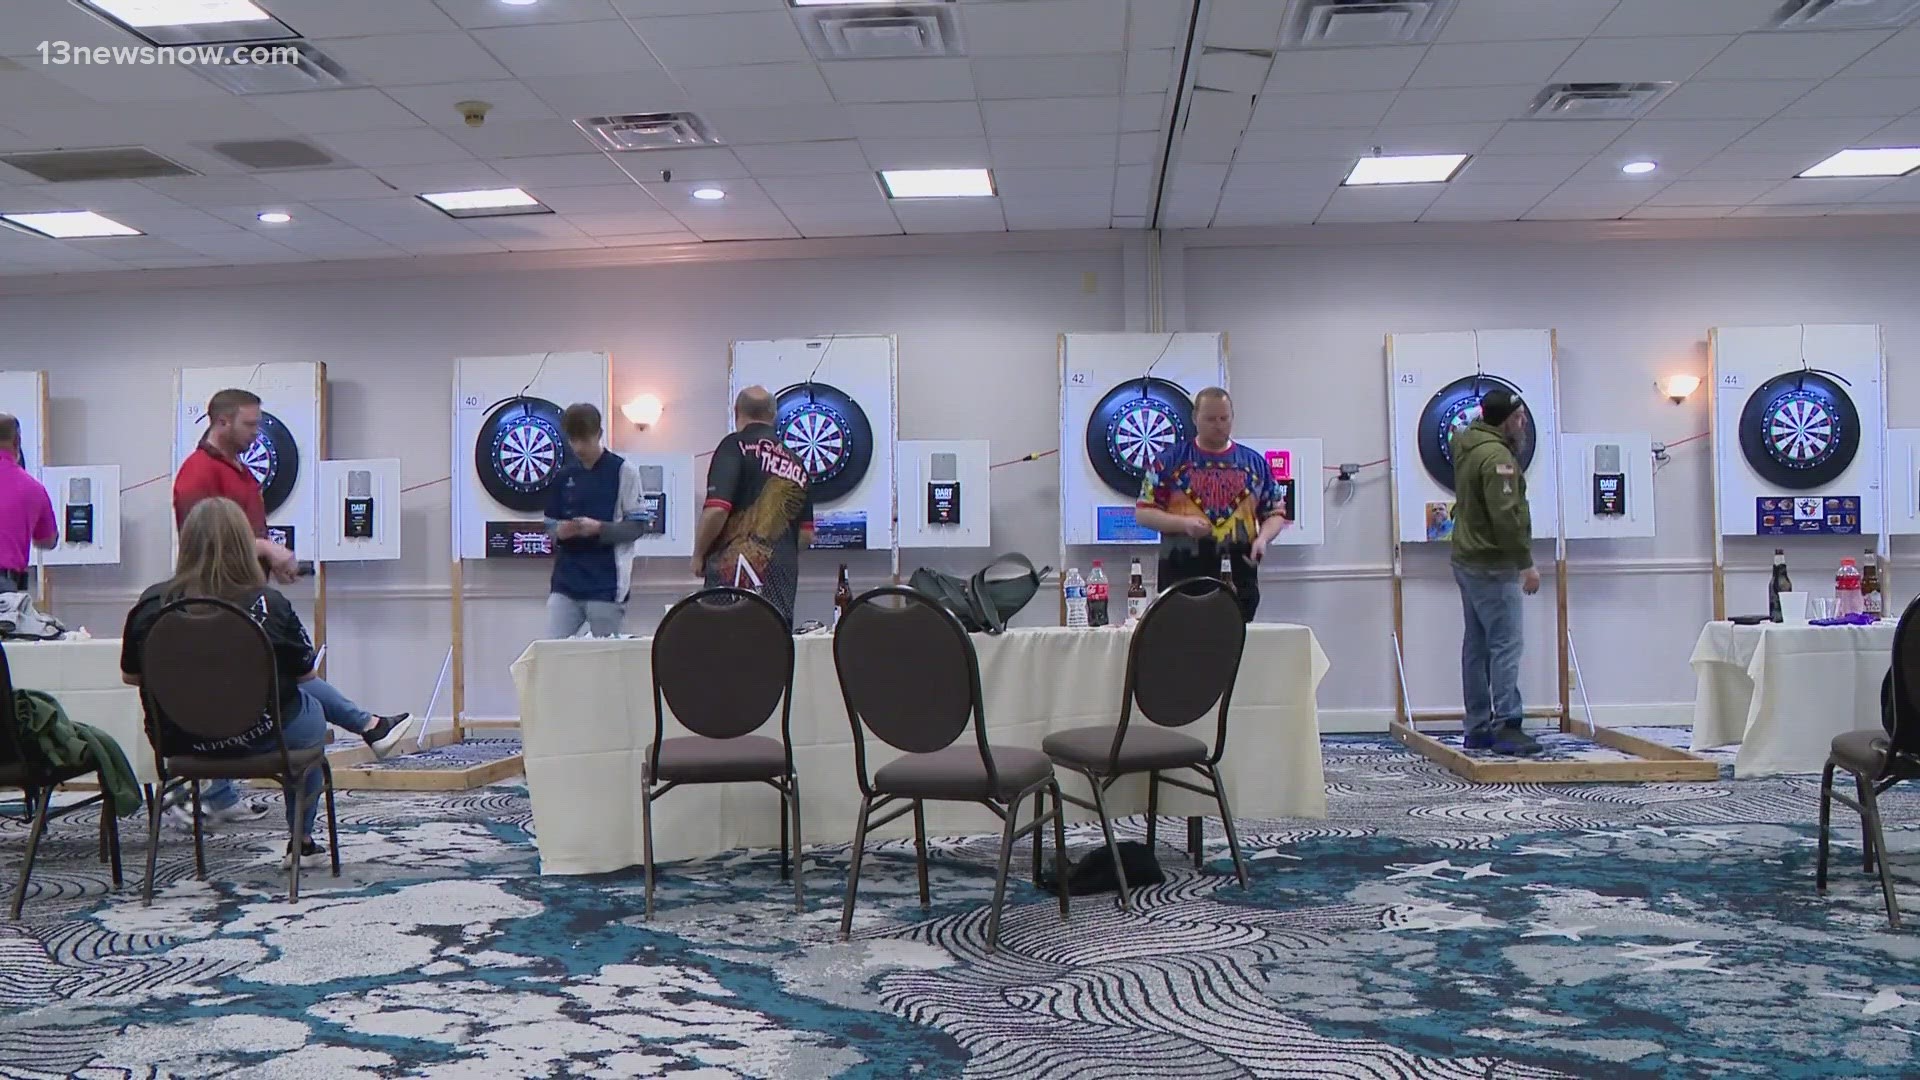 The Tidewater Area Dart Association held their 37th annual Virginia Dart Classic at the Wyndham Virginia Beach Oceanfront.